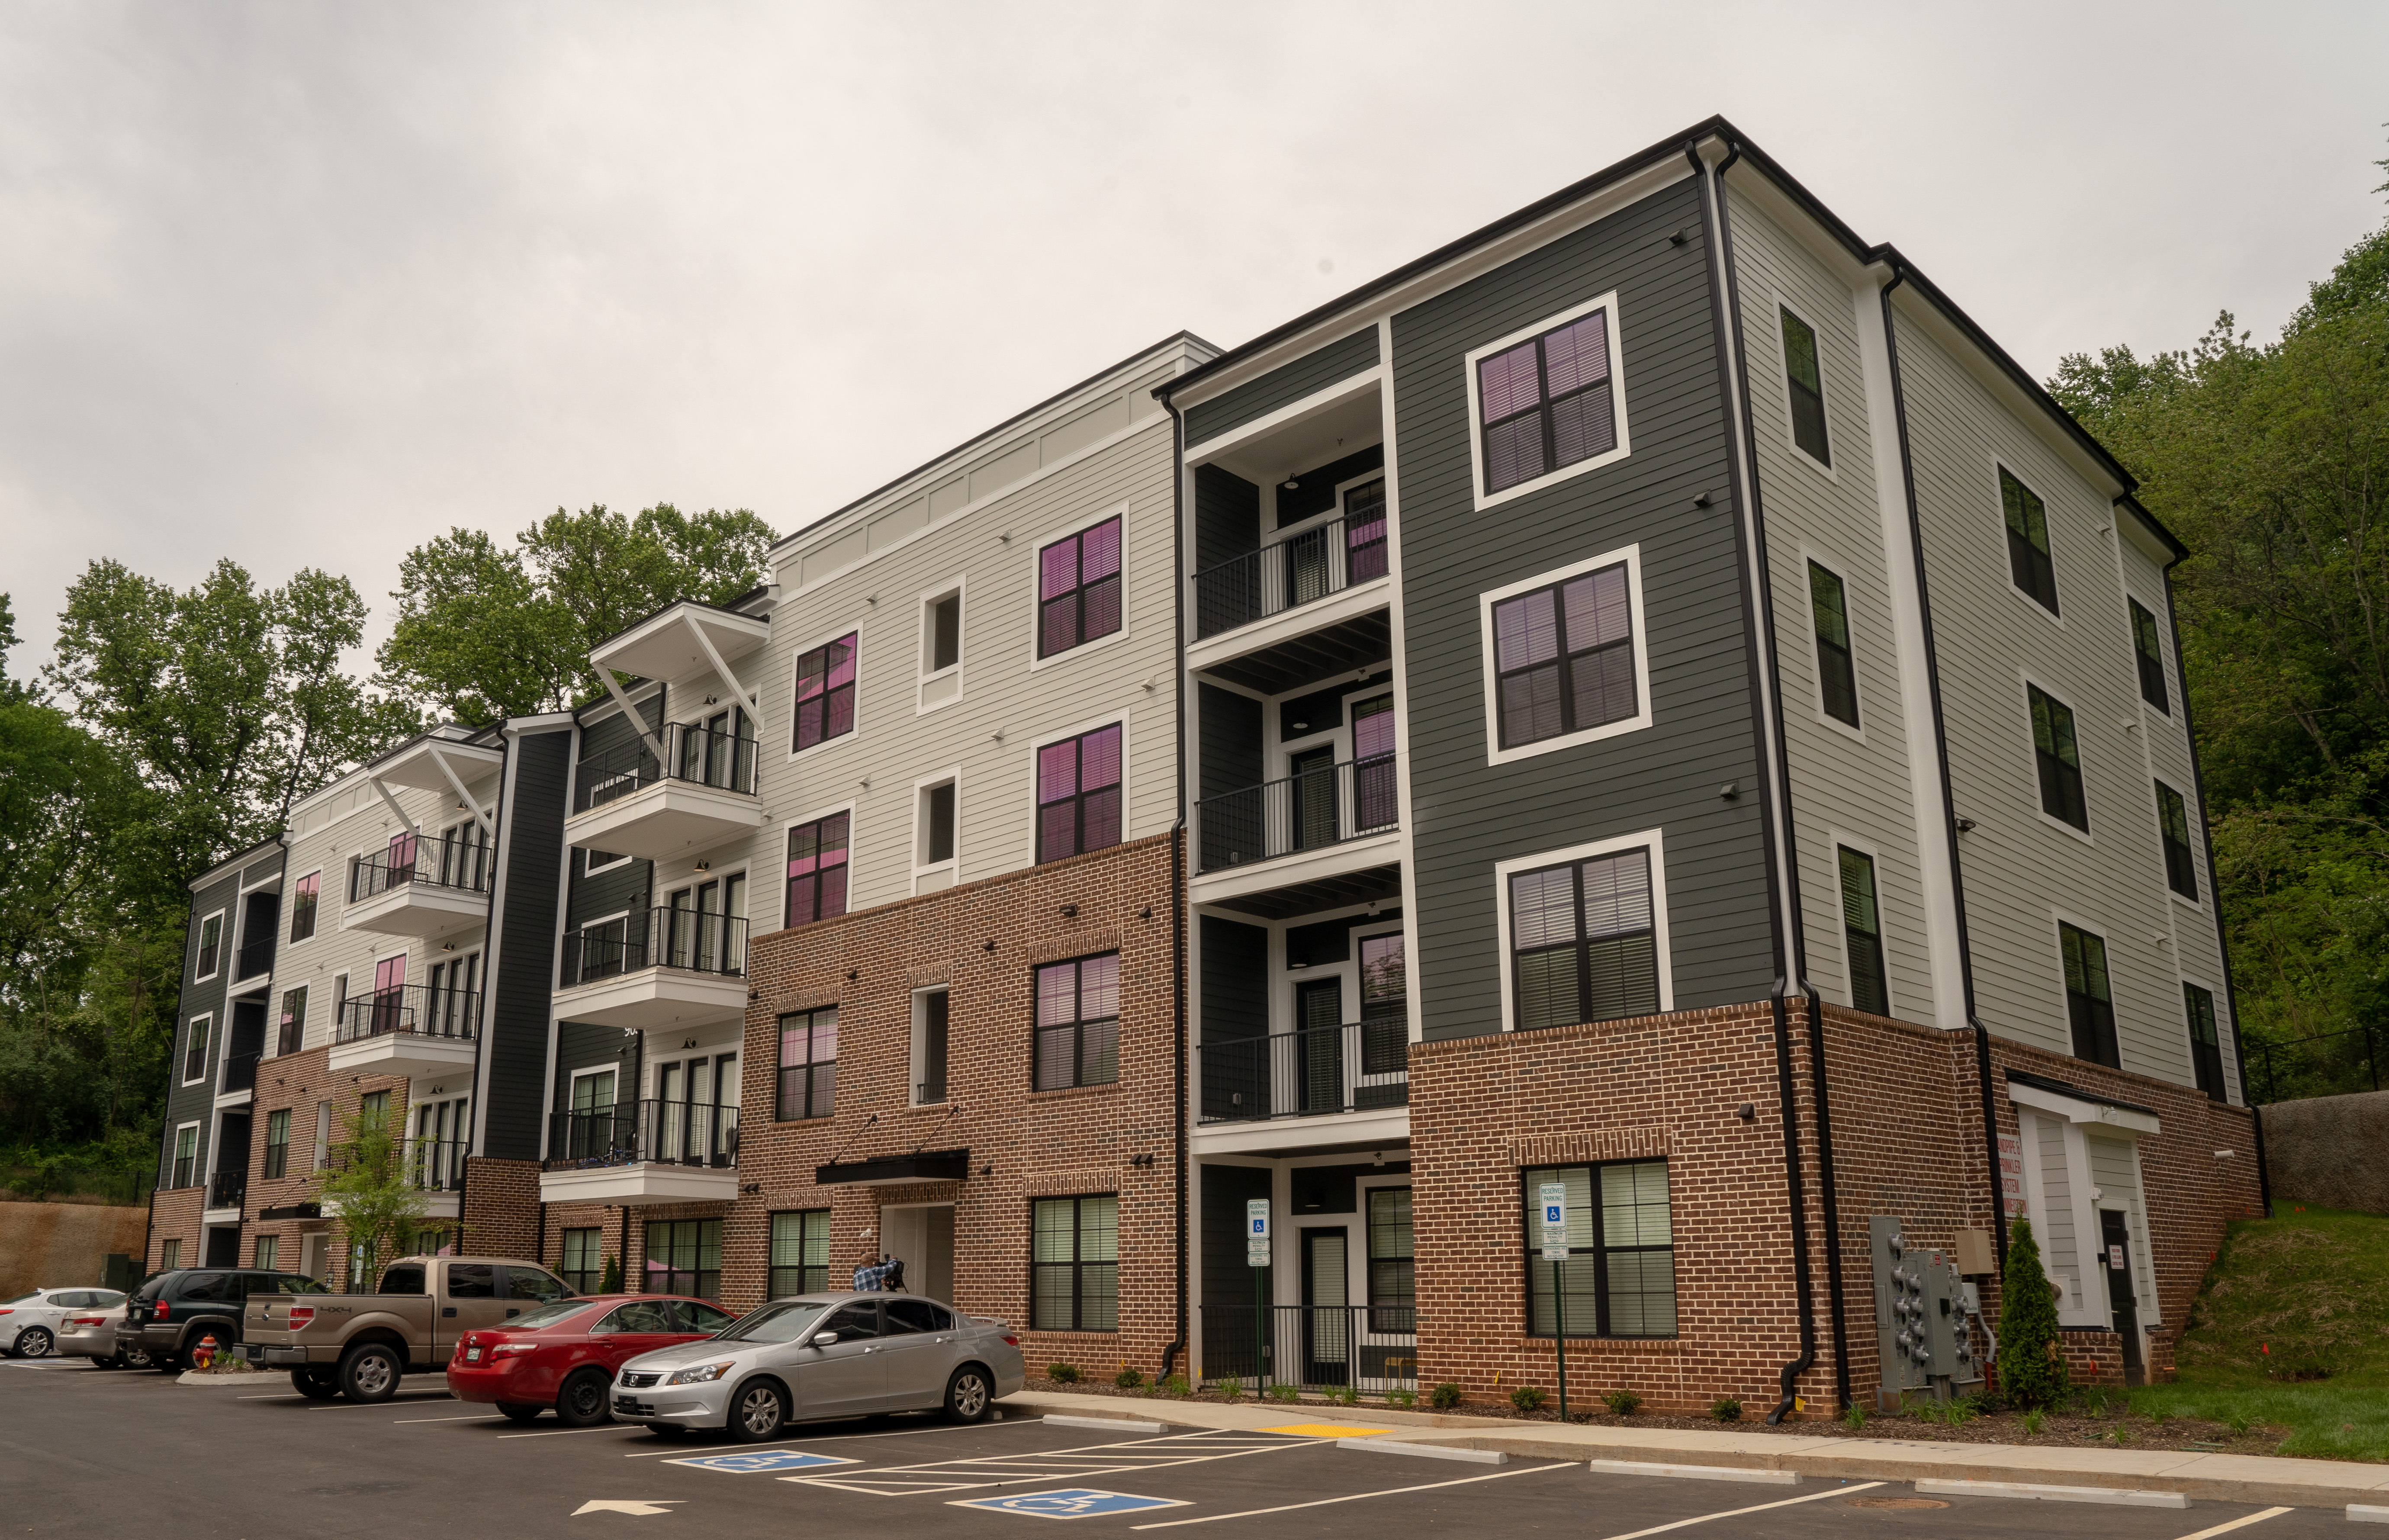 West Knoxville's newest affordable housing property, The Flats at Pond Gap